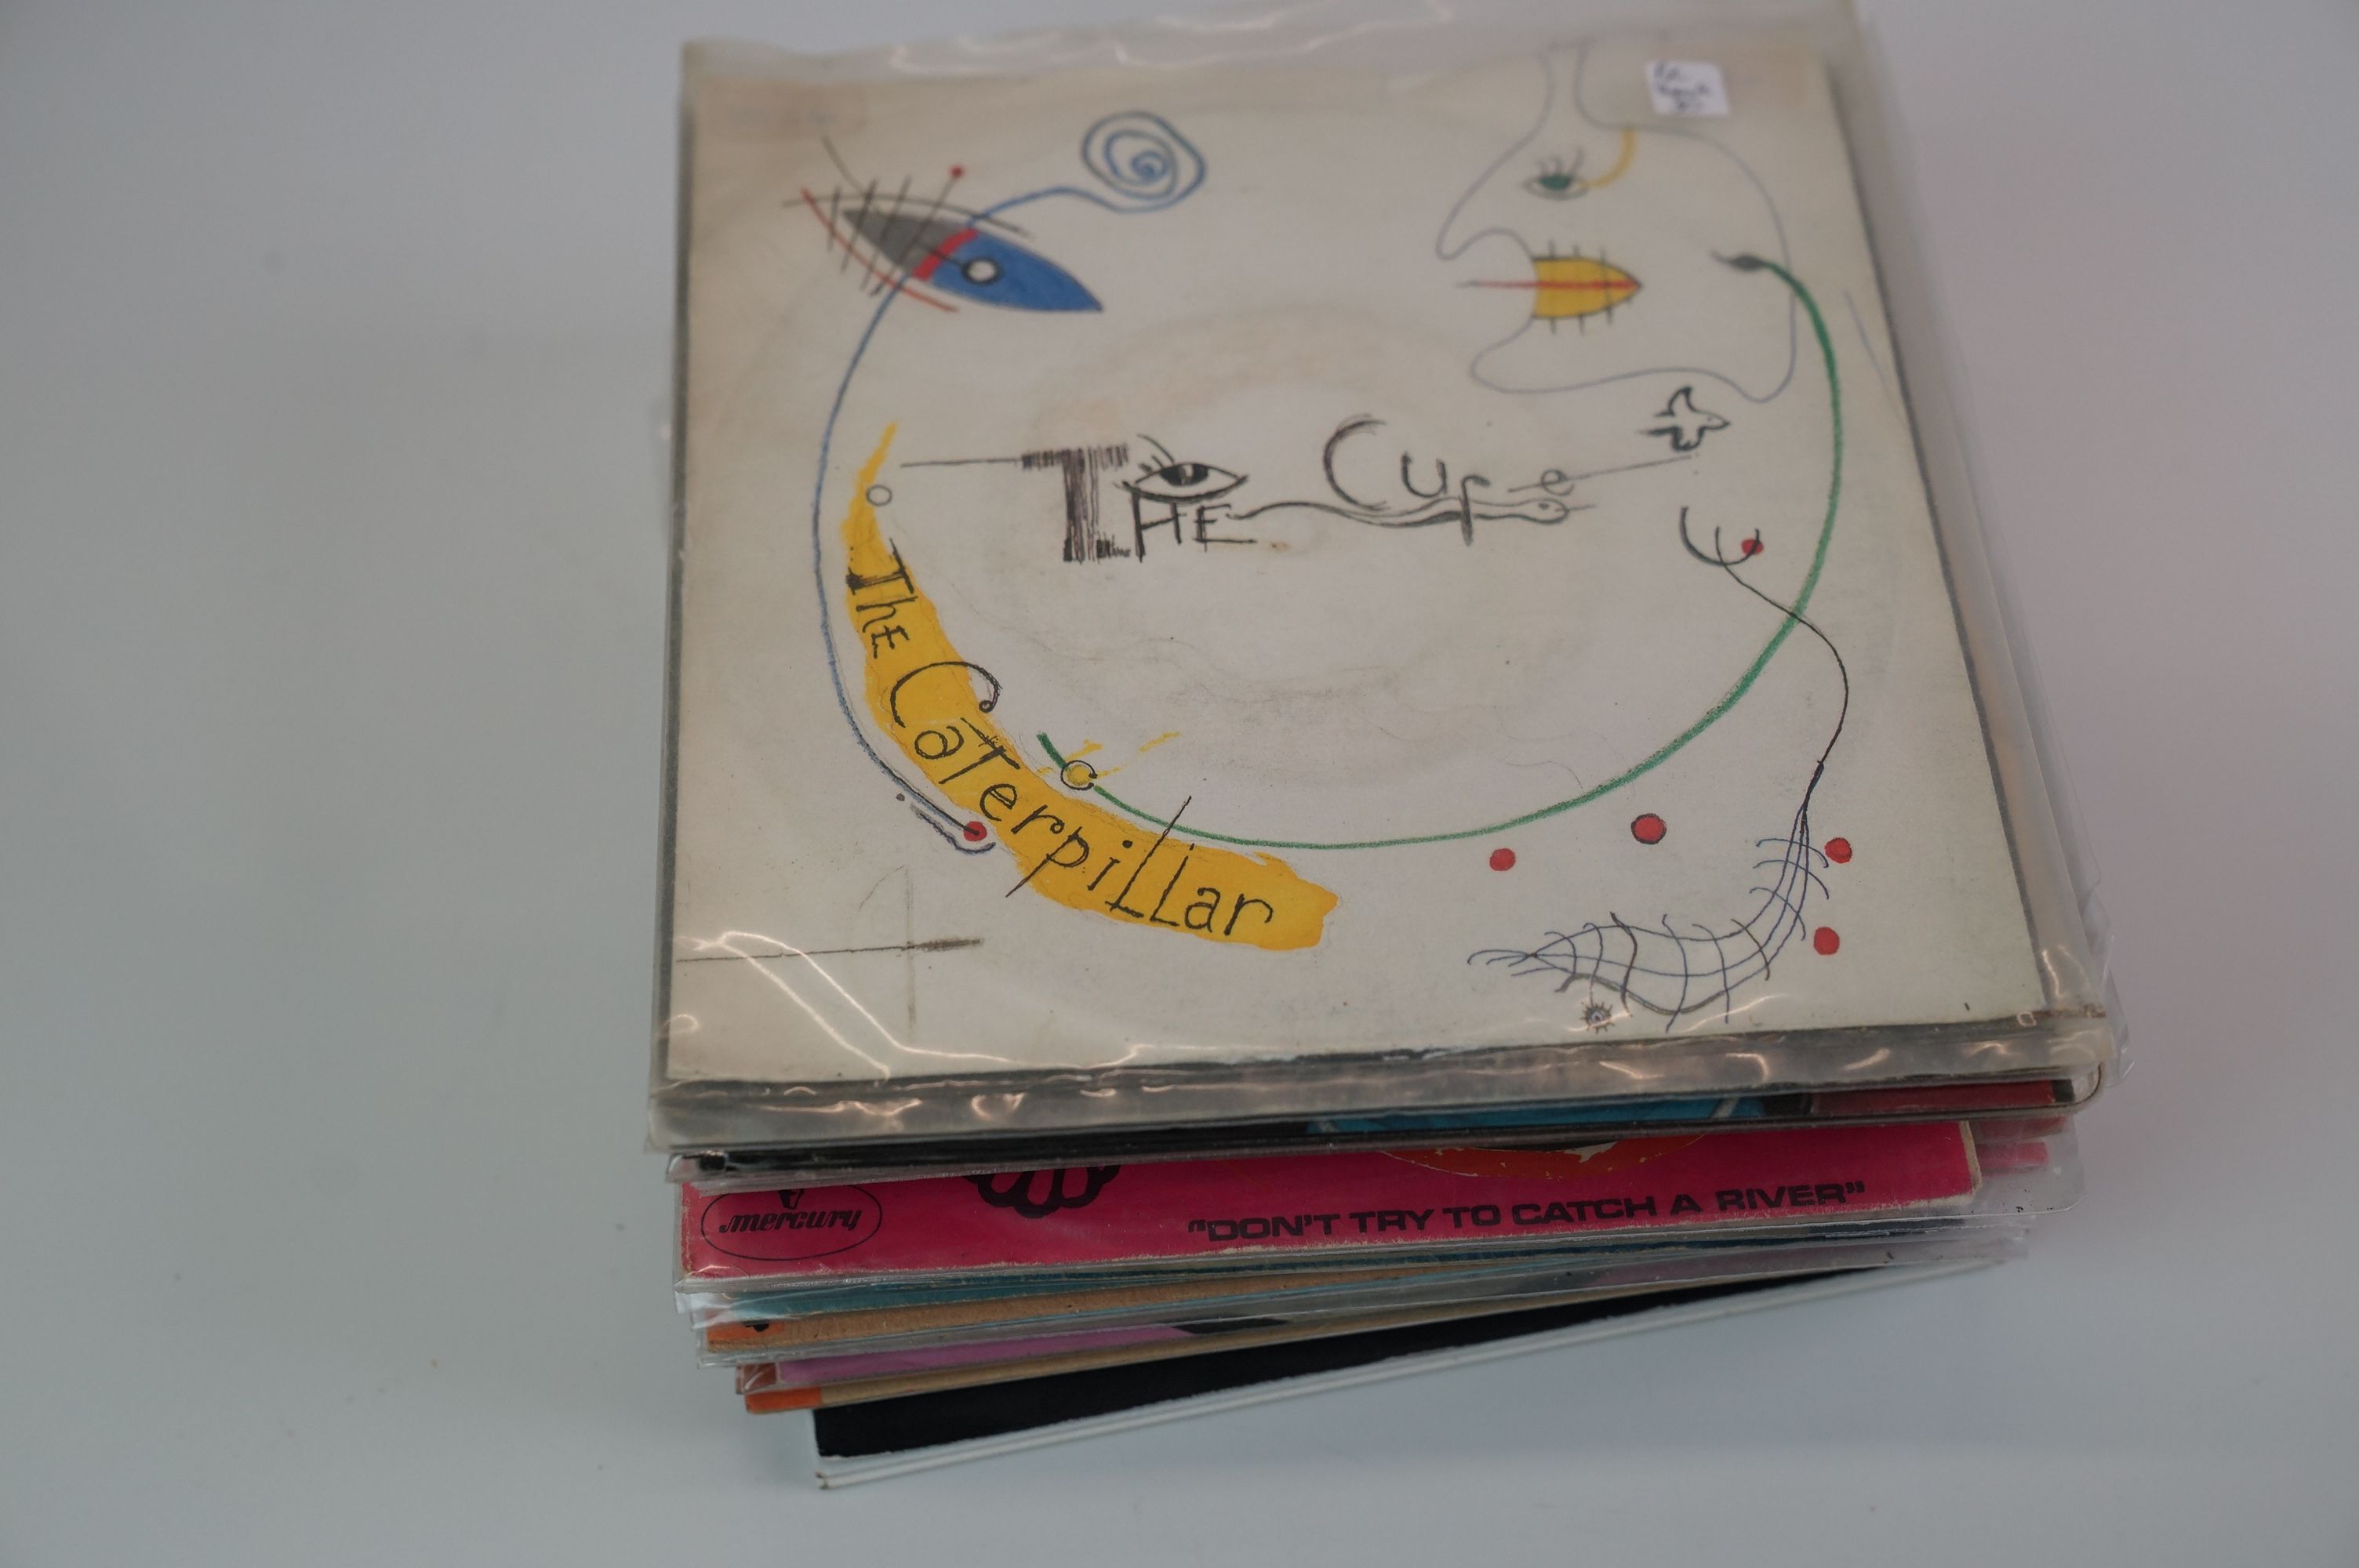 Vinyl - Collection of 28 EPs and 45s to include The Cure, Deep Purple, Fleetwood Mac etc - Image 2 of 4